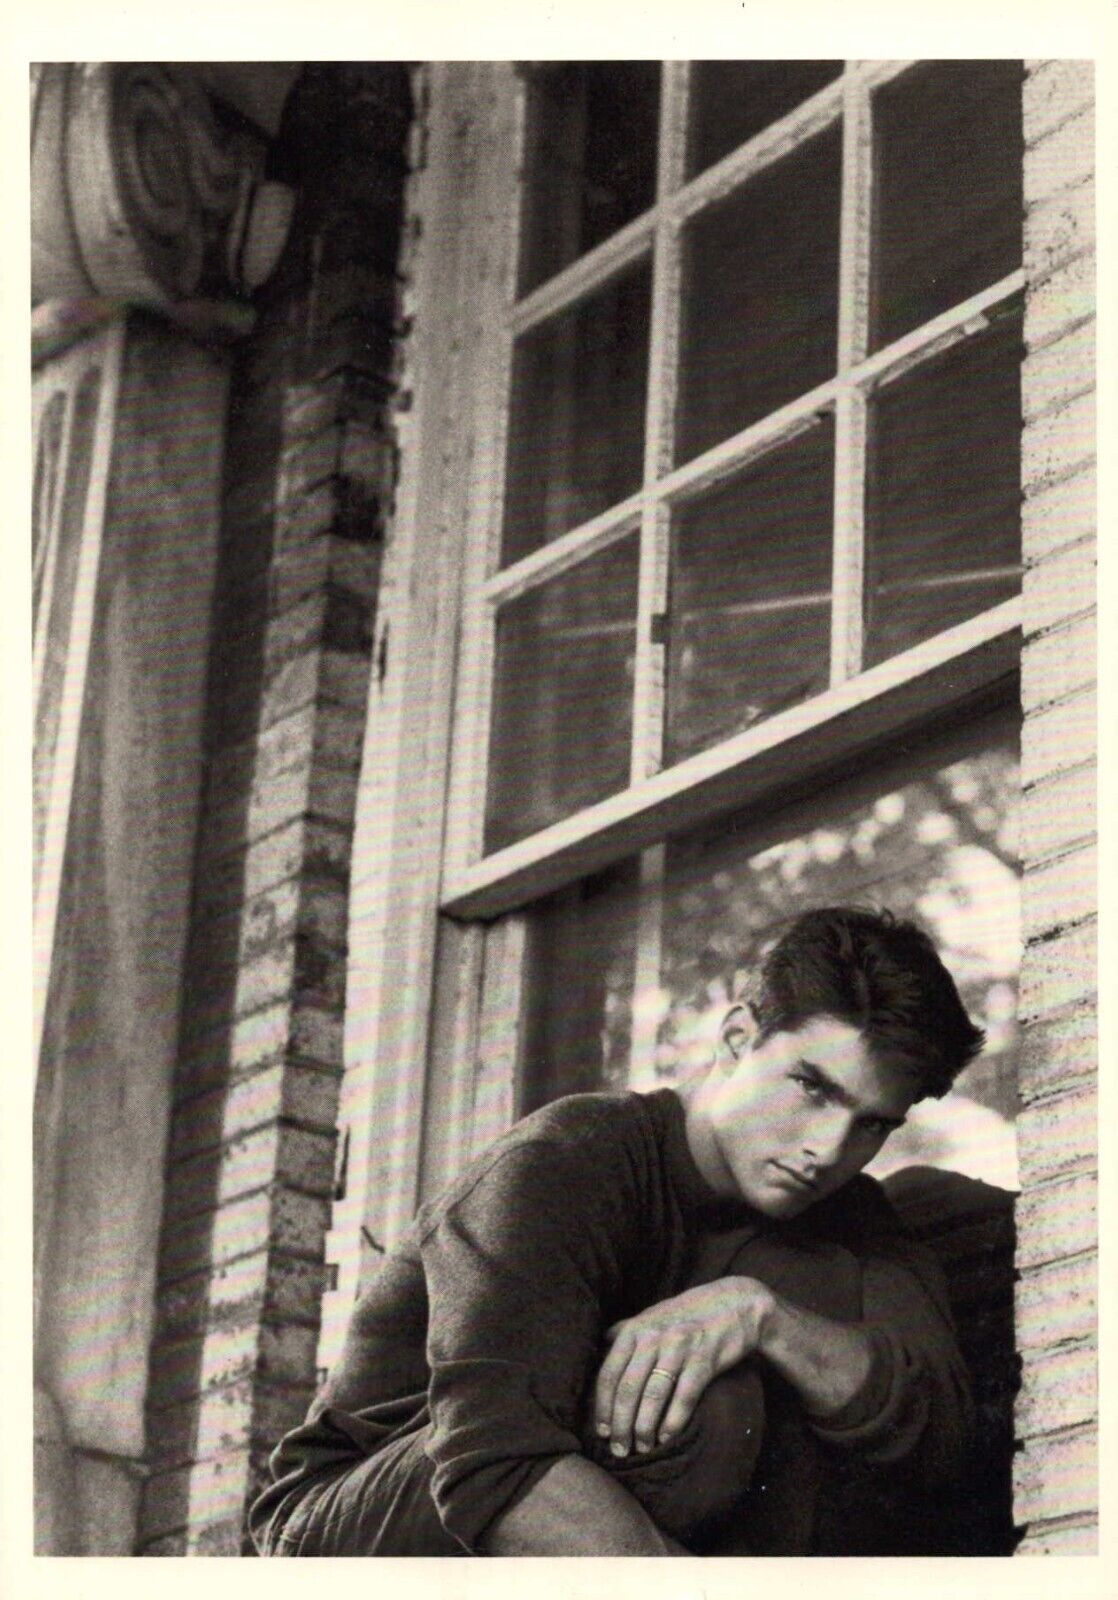 Tom Cruise Actor Dallas 1988 Photo by Herb Ritts Postcard